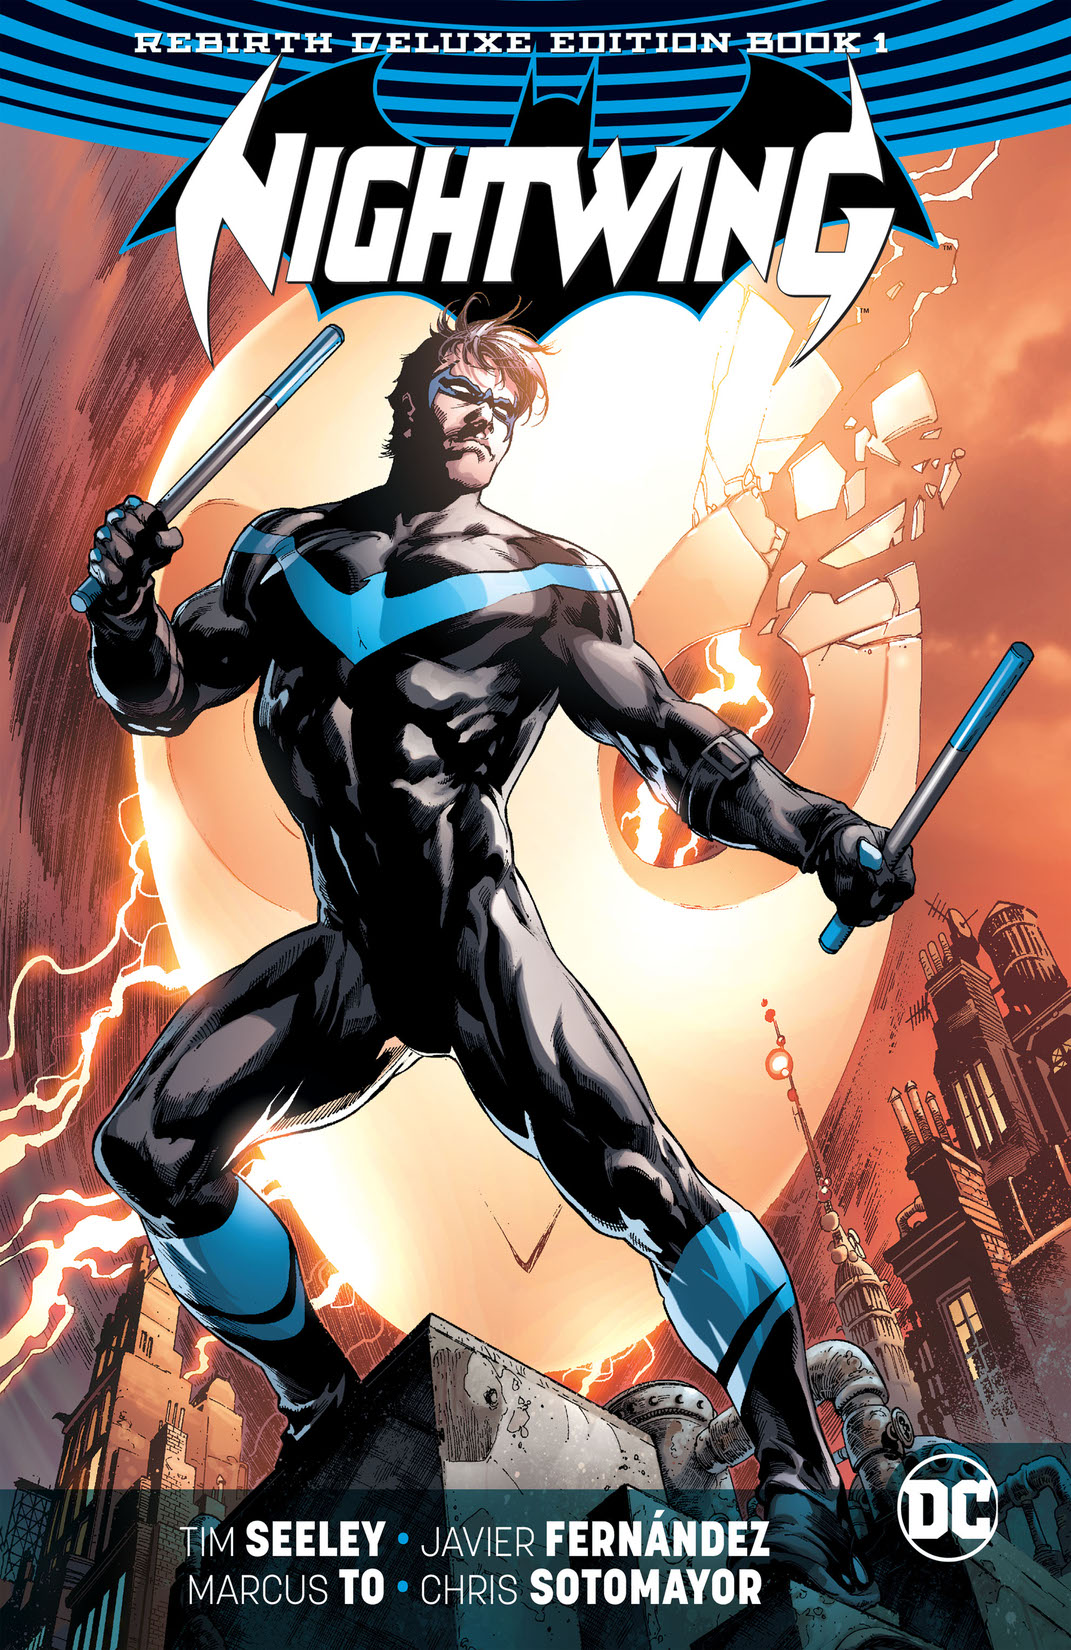 Nightwing: The Rebirth Deluxe Edition Book 1 preview images